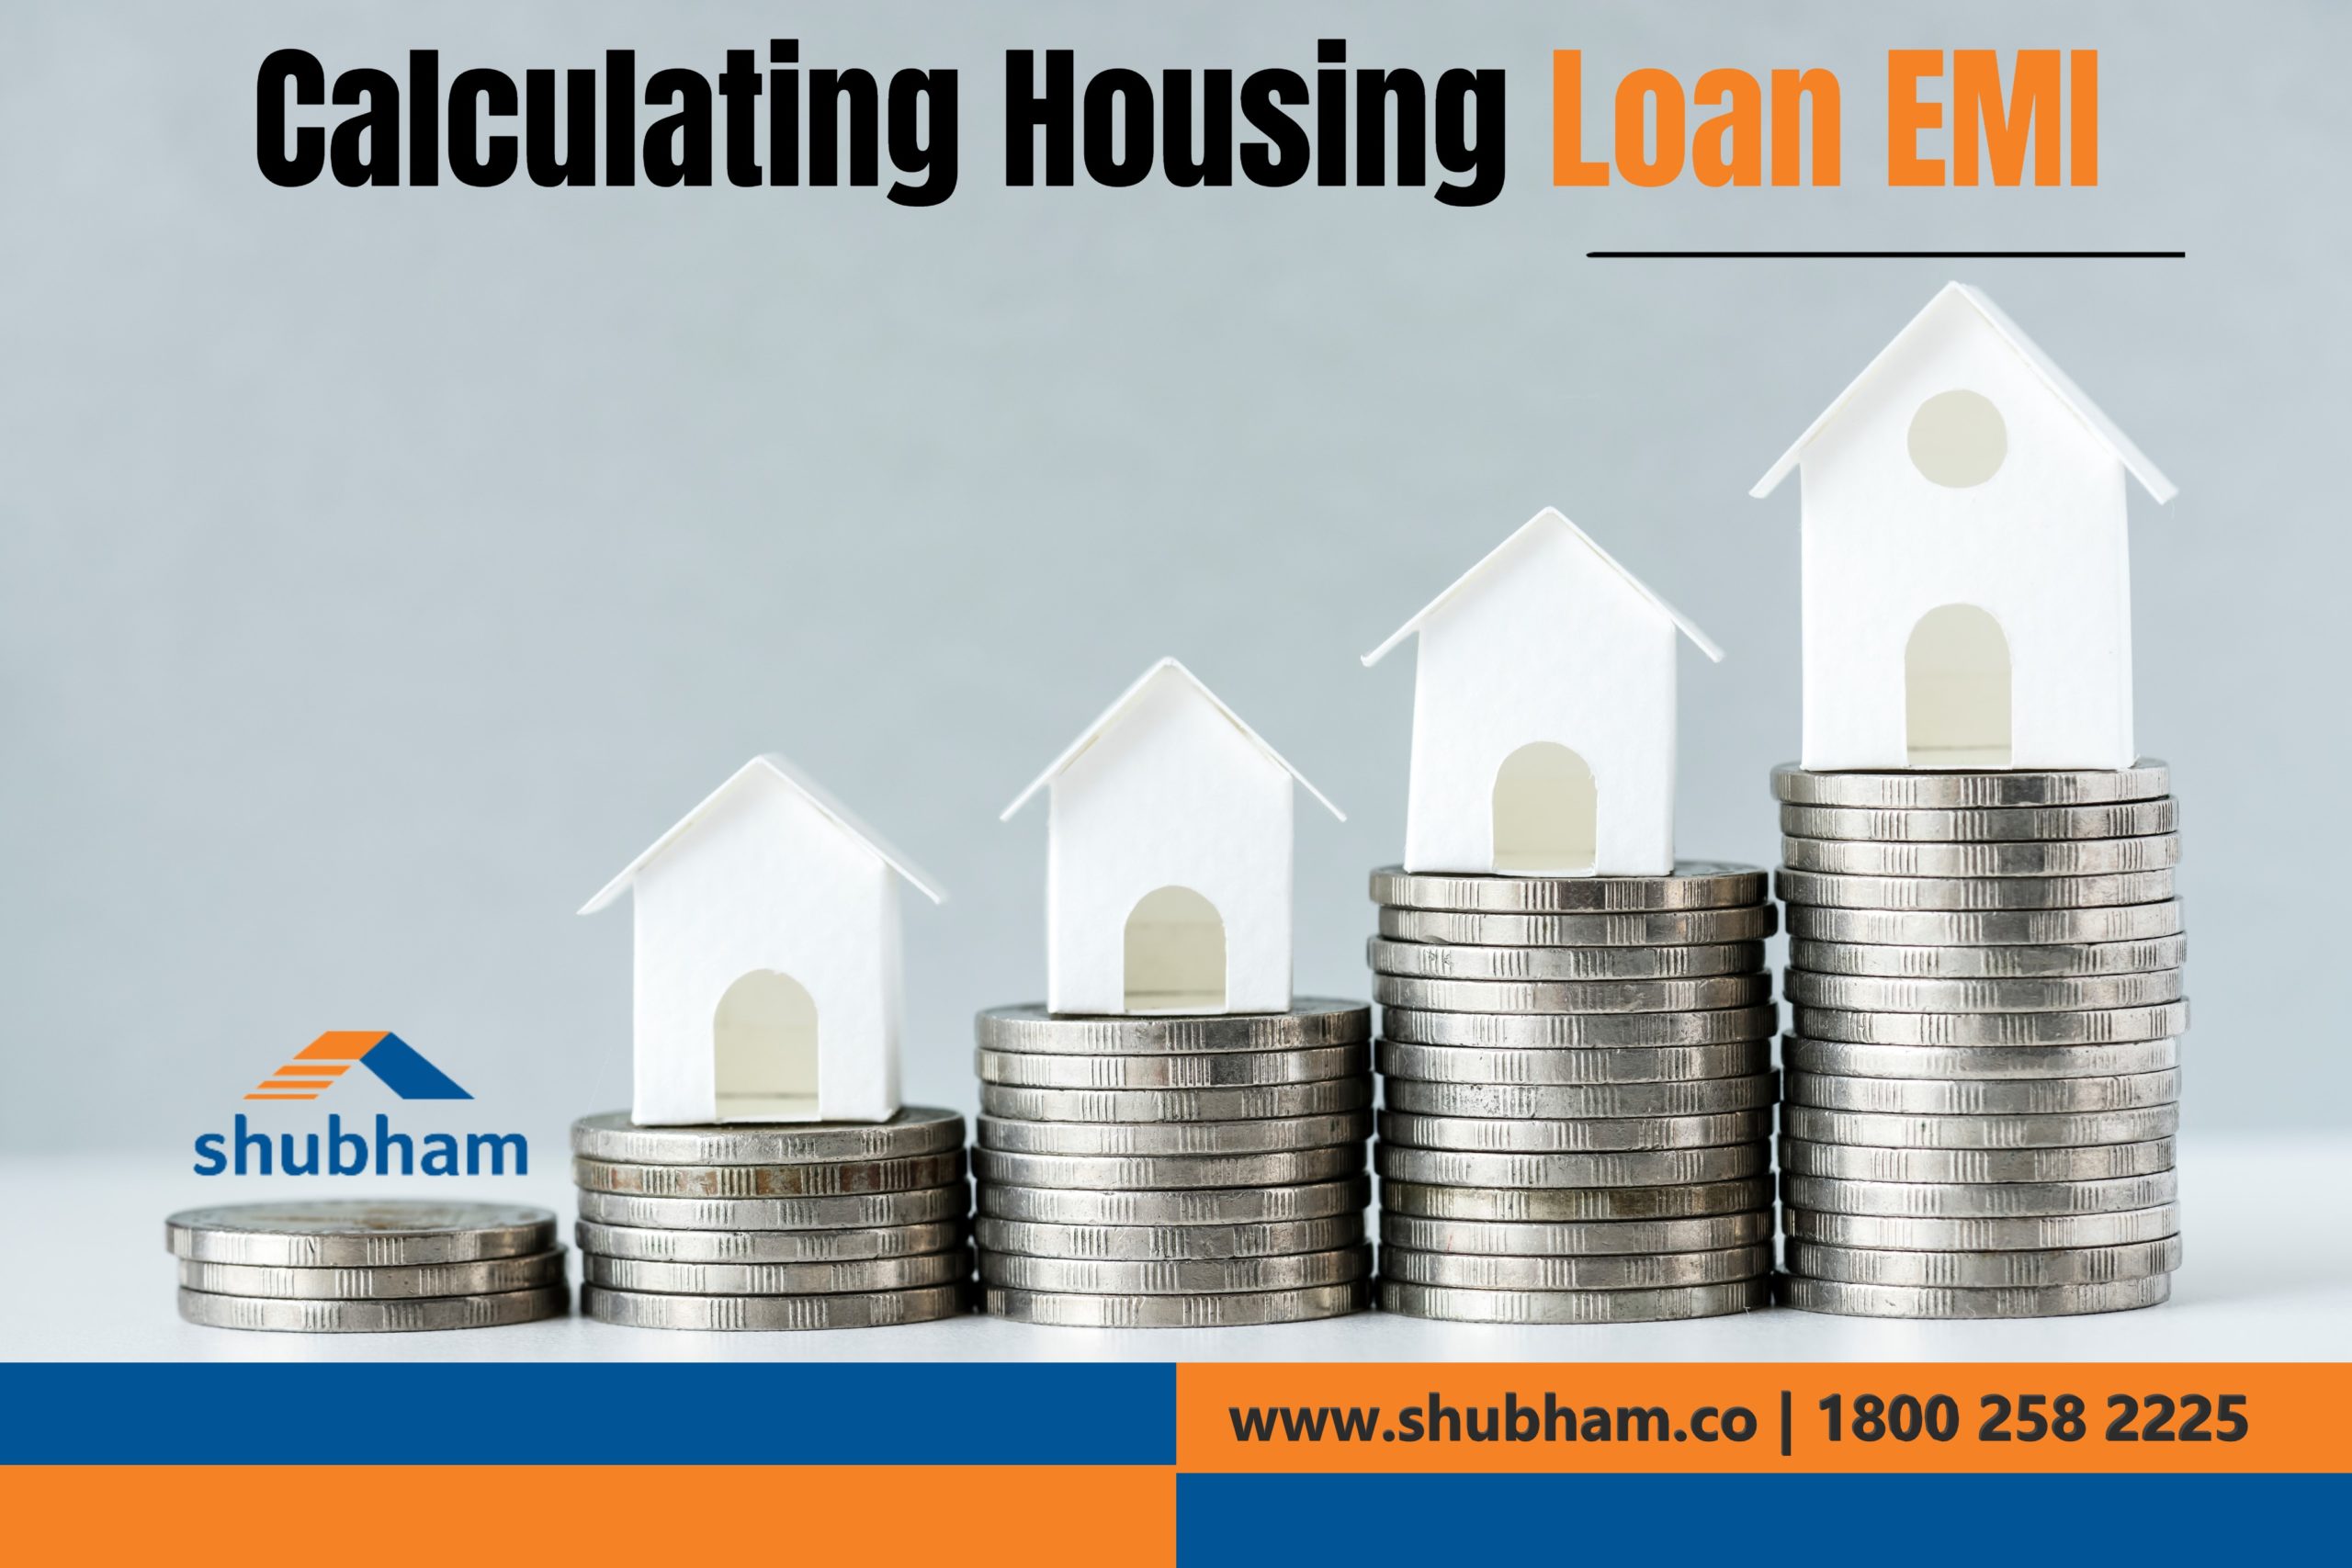 How is the EMI of a Housing Loan Calculated and is it Advisable to go for EMI than Purchasing Outright?